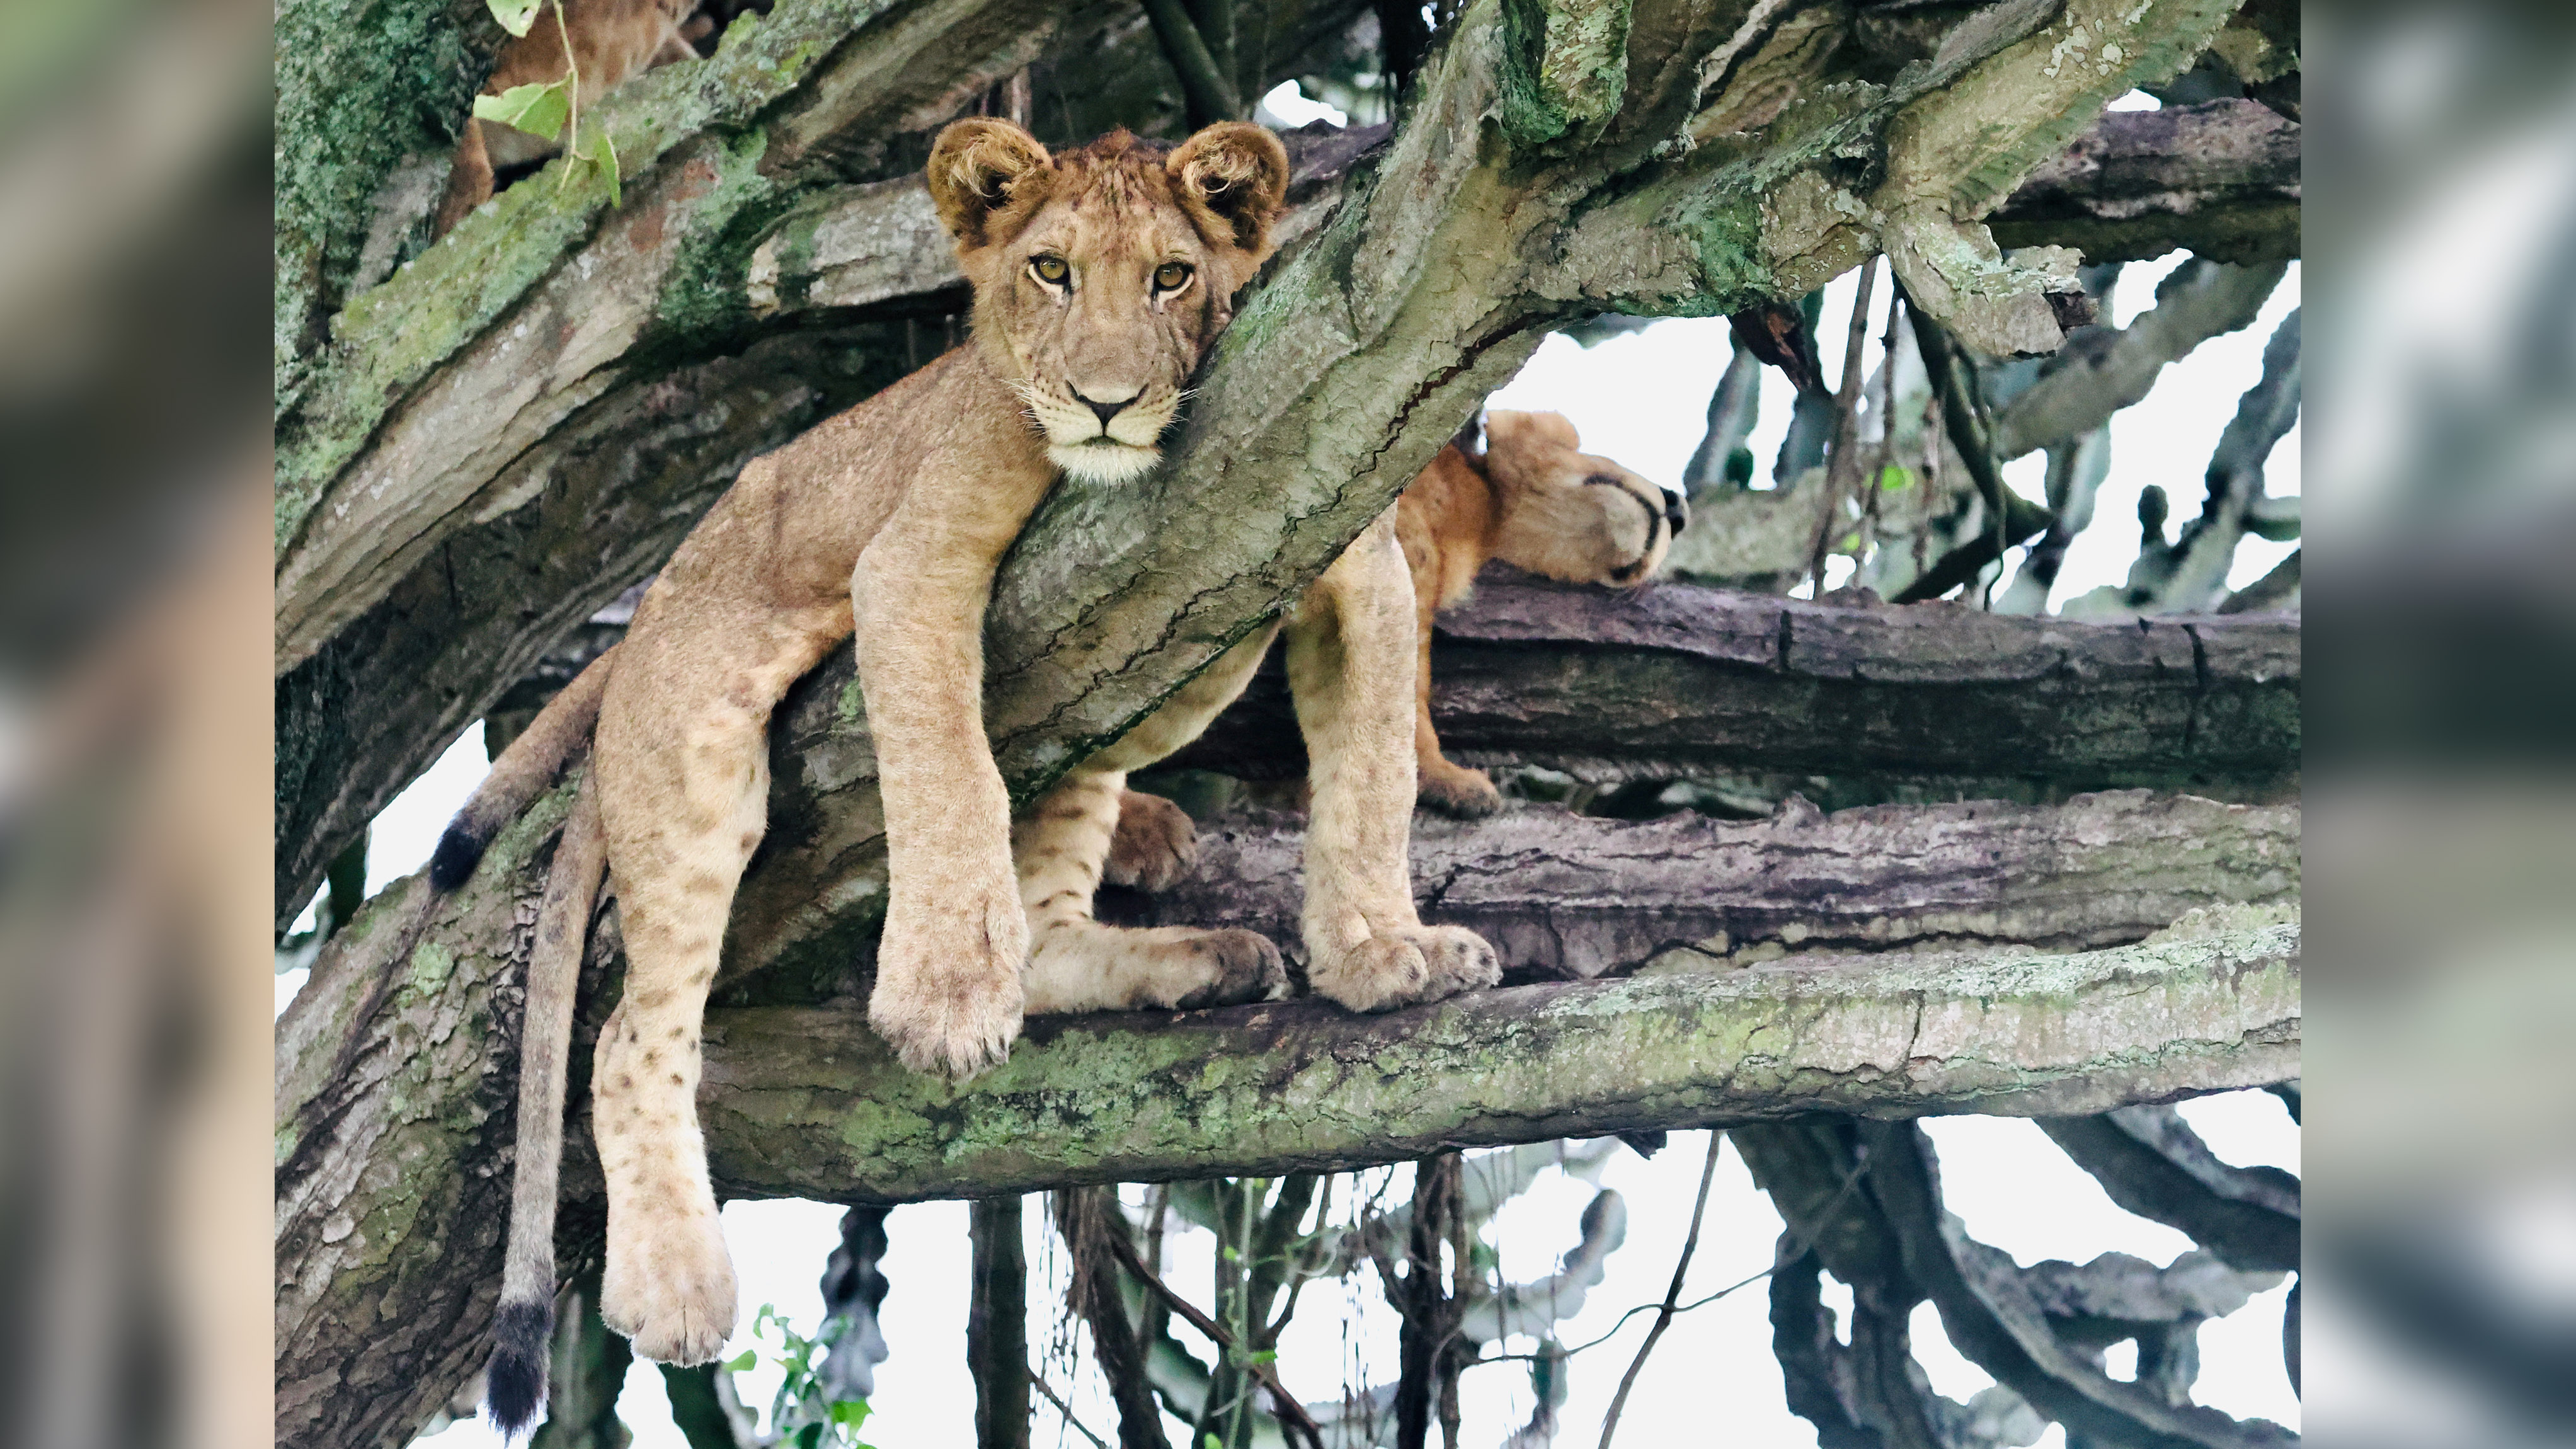 Six-month-old cubs in the northern sector of Queen Elizabeth National Park, Uganda.